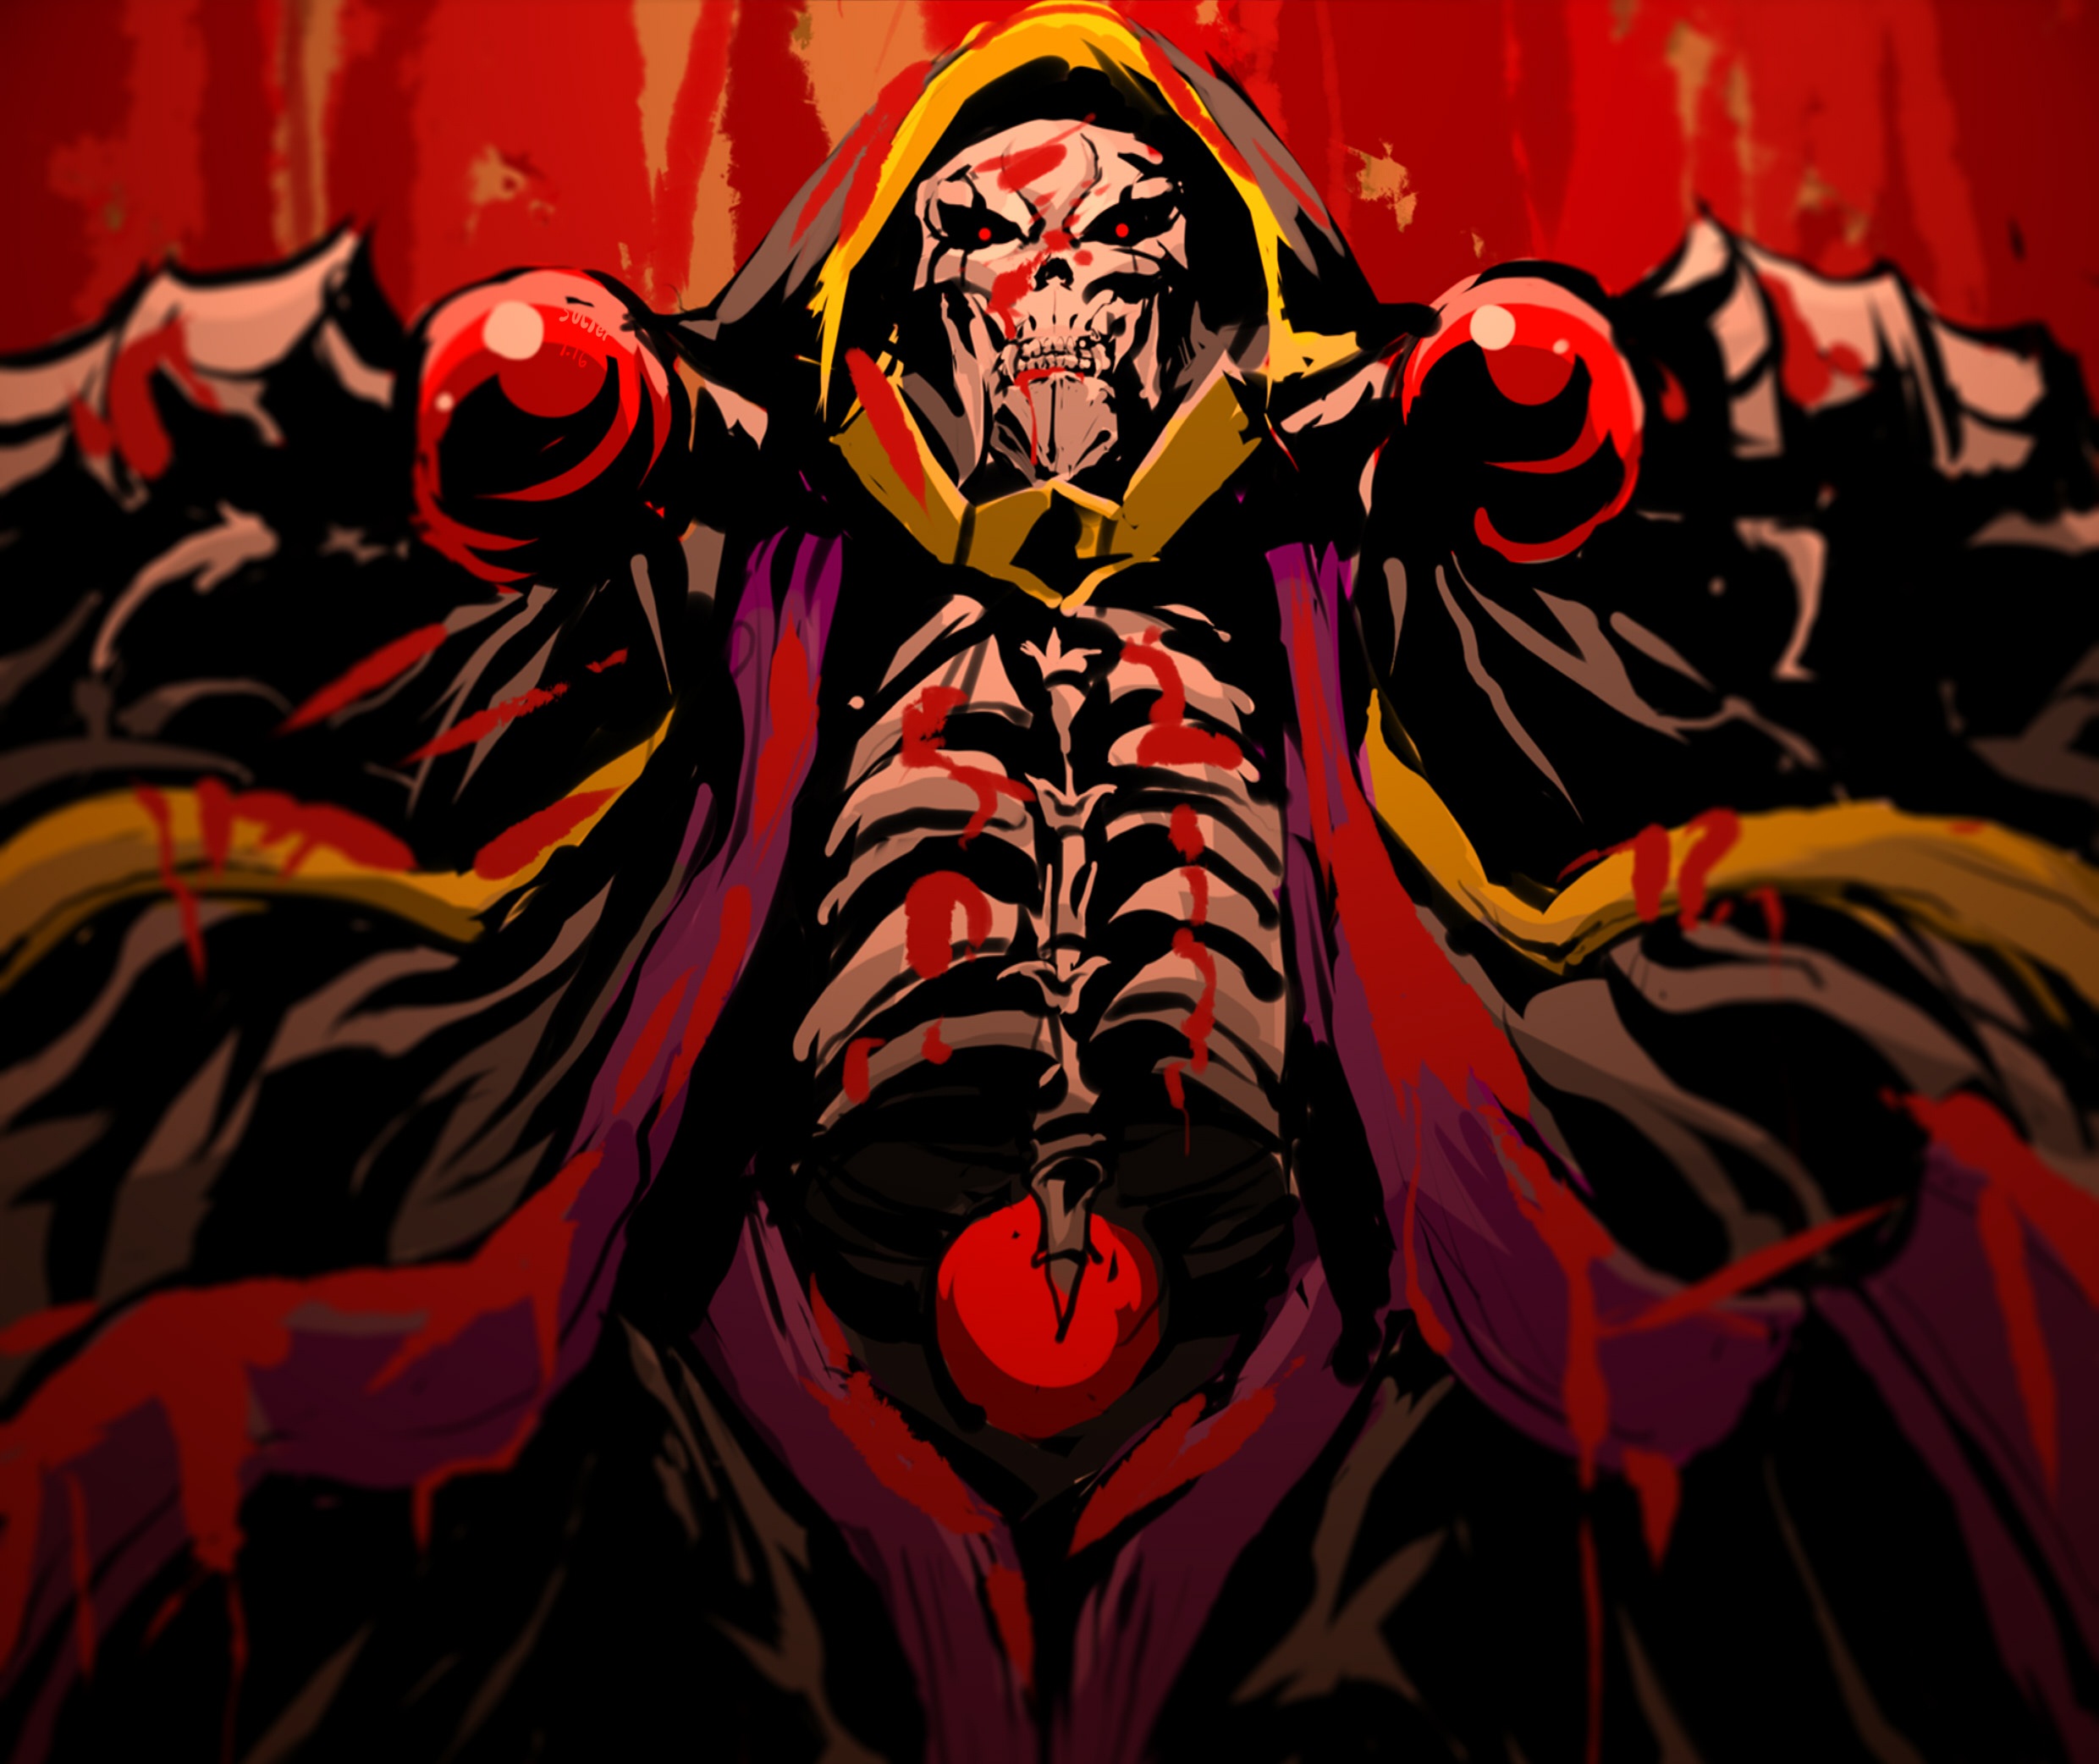 OverlorD Ⅱ by sucier